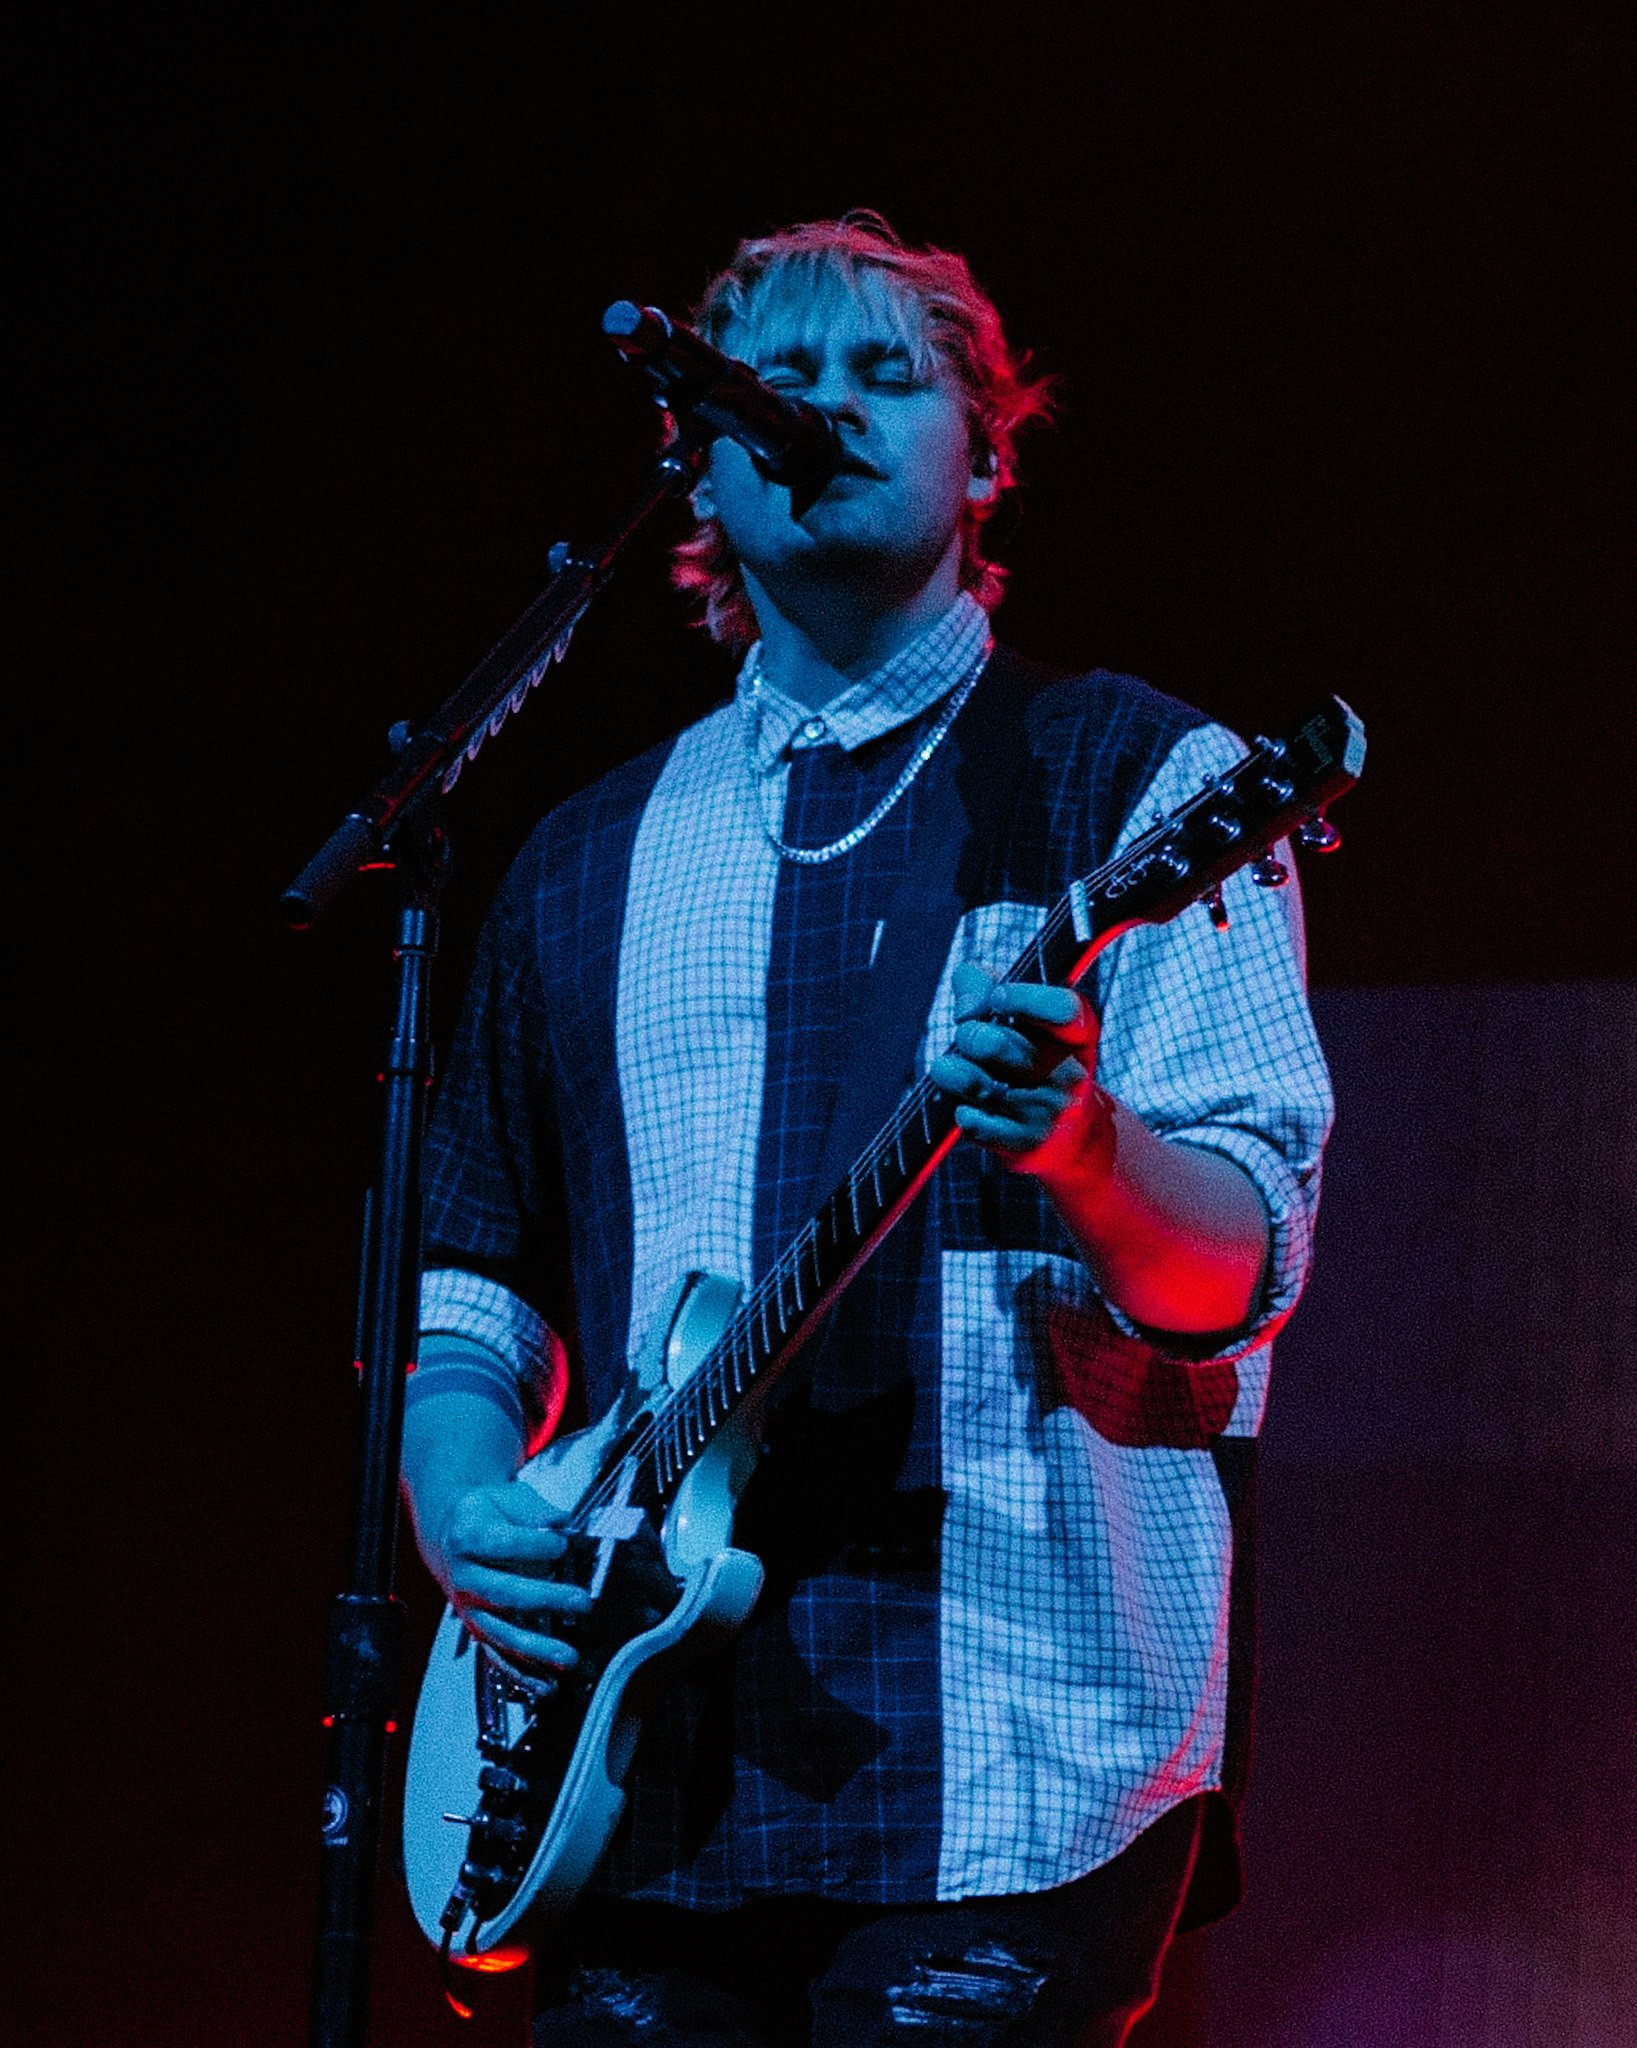  Guitarist Michael Clifford feels the music as the band performs “More .”  